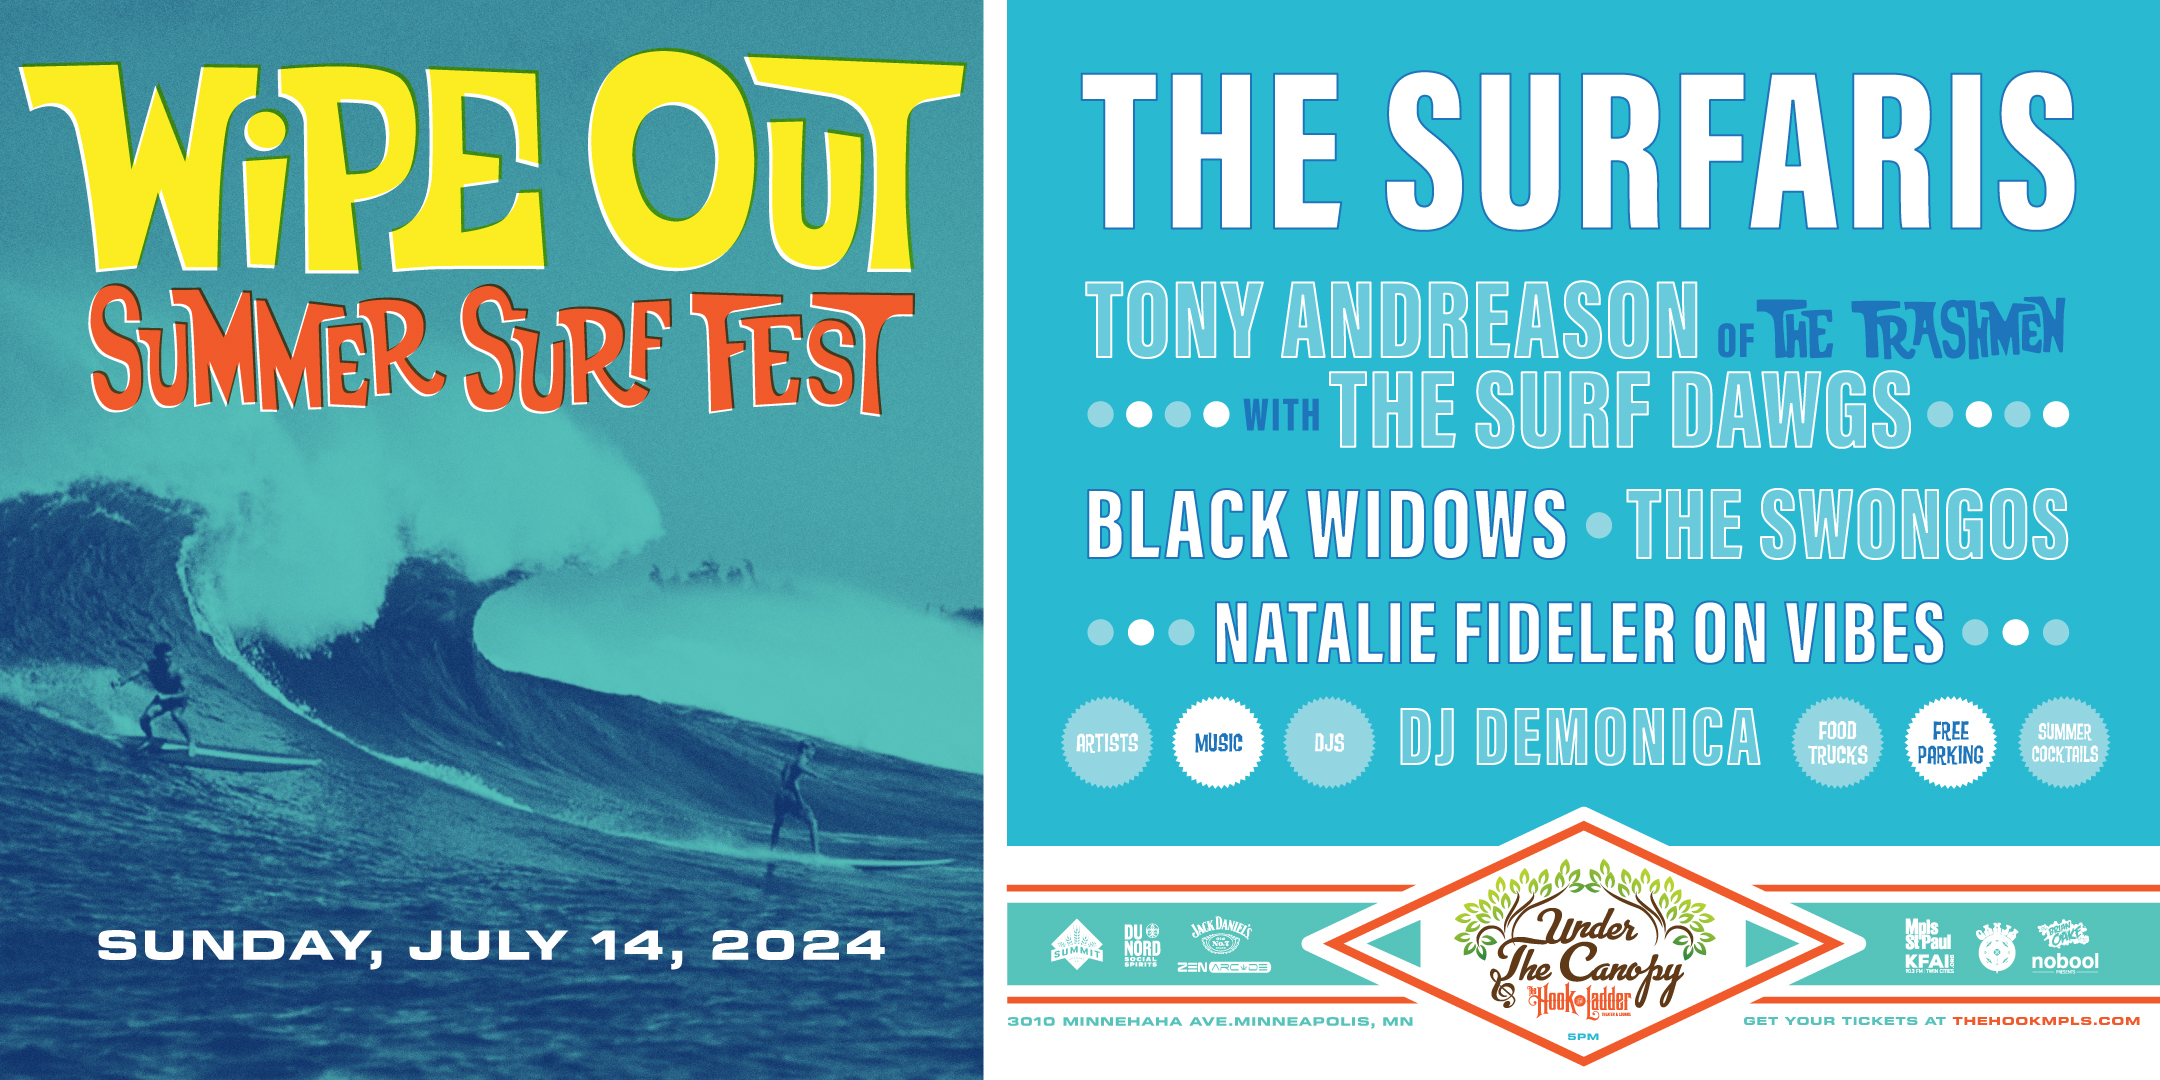 Wipe Out Summer Surf Fest with The Surfaris + Tony Andreason of The Trashmen & The Surf Dawgs plus Black Widows, The Swongos, Natalie Fideler on vibes, DJ Demonica, & more! Sunday, July 14 Under The Canopy at The Hook and Ladder Theater "An Urban Outdoor Summer Concert Series" Doors 5:00pm :: Music 5:30pm :: 21+ Reserved Seats: $43 GA: $27 ADV / $33 DOS VIP Meet & Greet: $40 (Add-On) Includes: Signed Poster, Special Merch Item, Photos with The Surfaris, & a Zen treat!